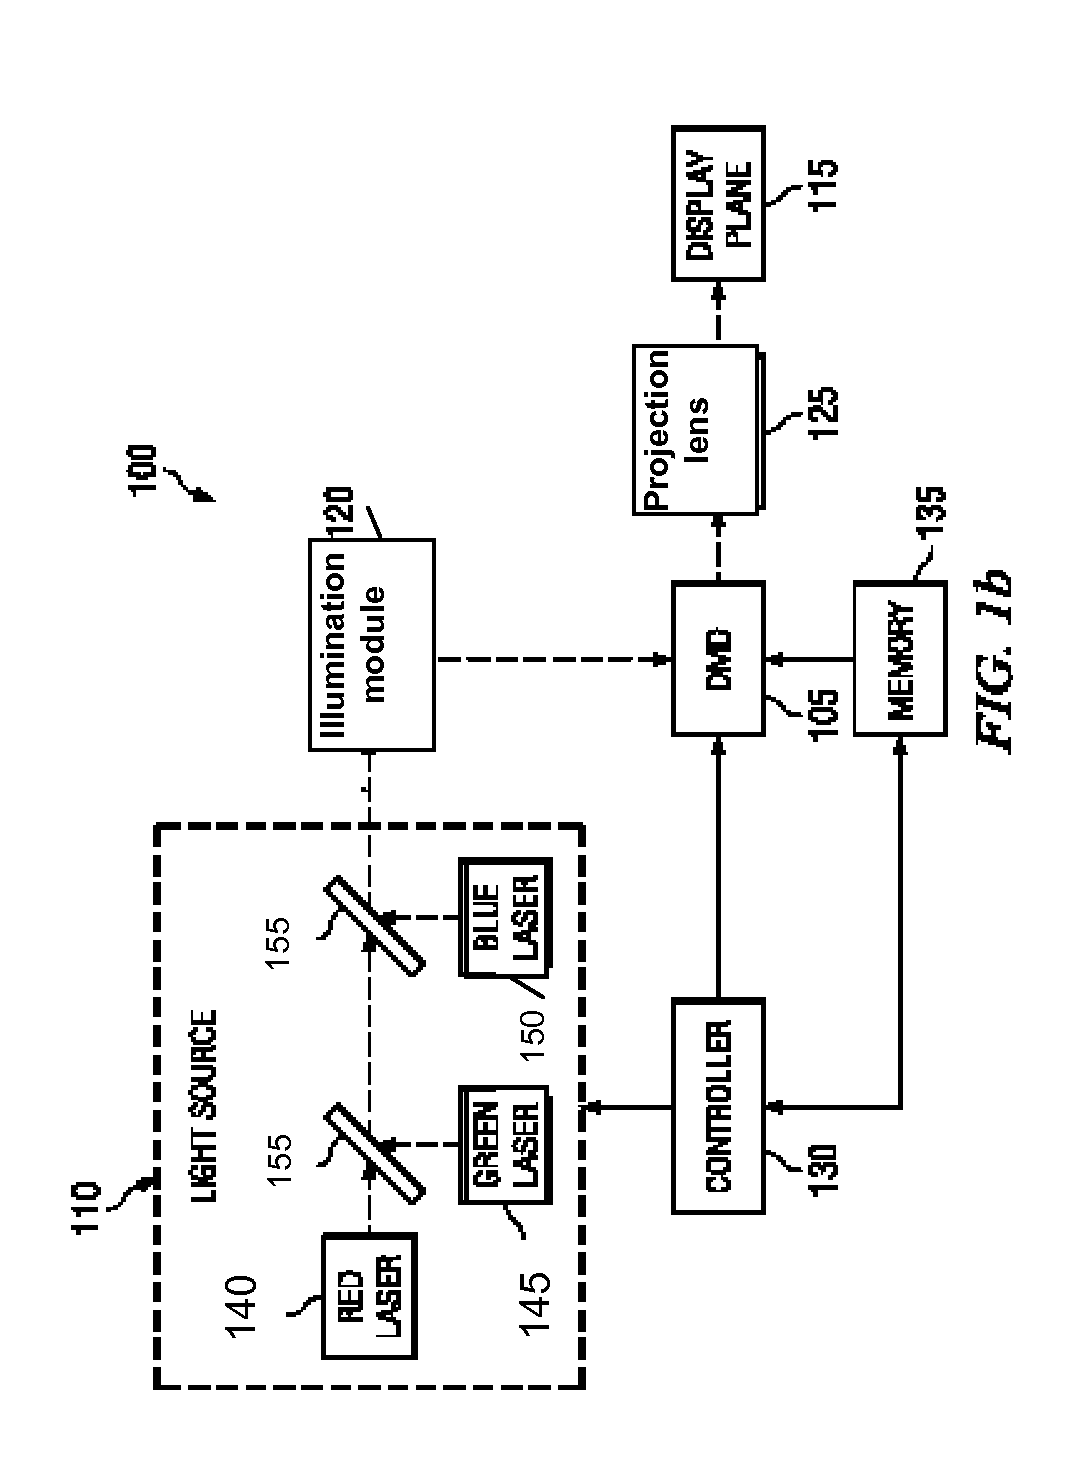 Off-Axis Projection System and Method